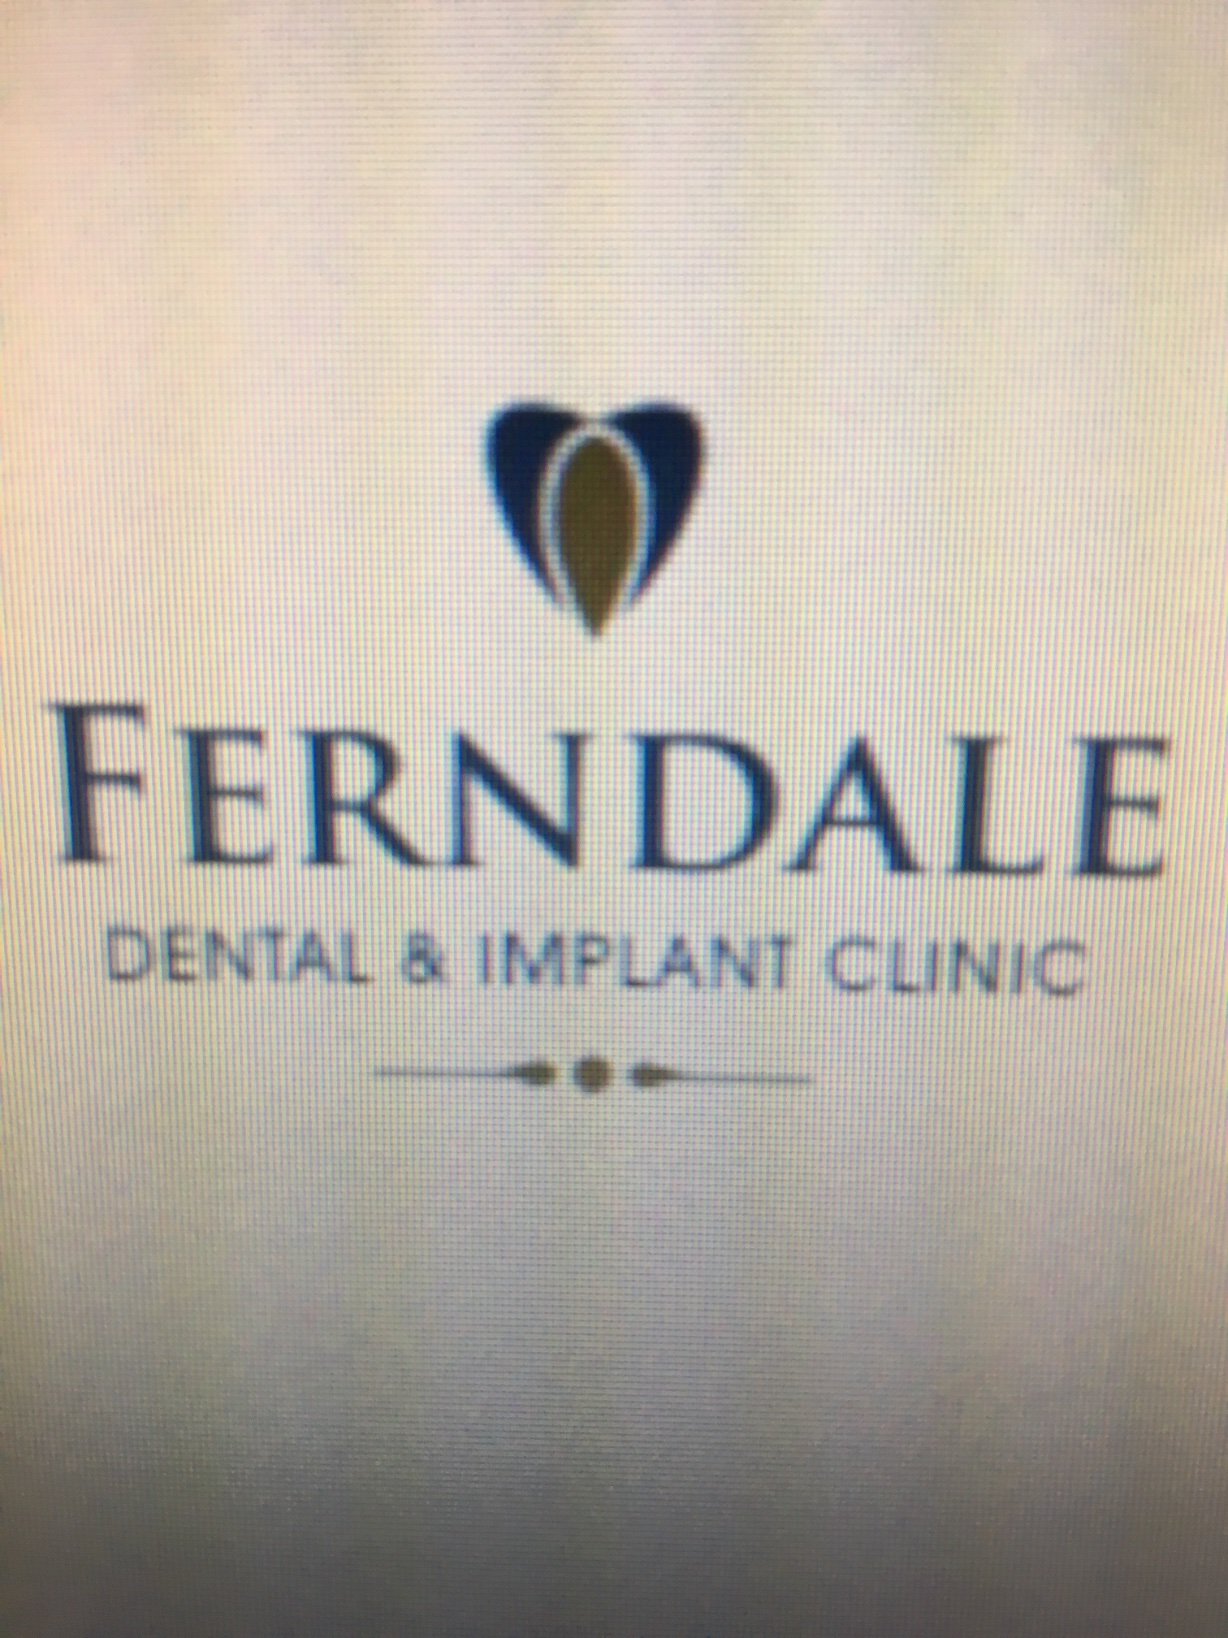 We provide a high quality of general dental care, cosmetic and implant dentistry with excellent patient service in a friendly, efficient and caring environment.